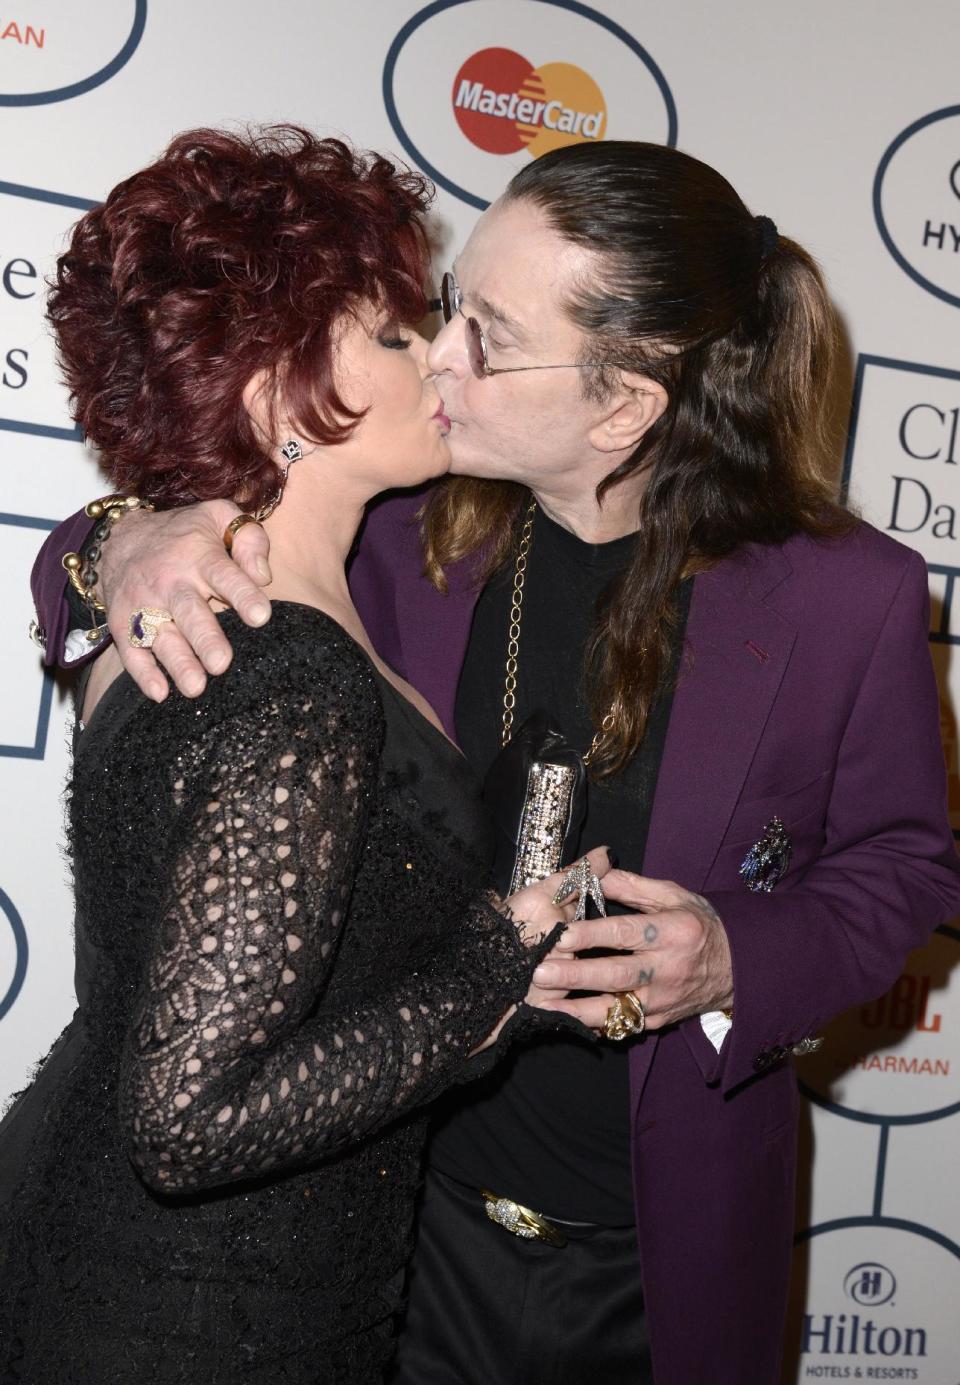 Sharon Osbourne, left, and Ozzy Osbourne kiss at the 56th annual GRAMMY awards - salute to industry icons with Clive Davis, on Saturday, Jan. 25, 2014, in Beverly Hills, Calif. (Photo by Dan Steinberg/Invision/AP)